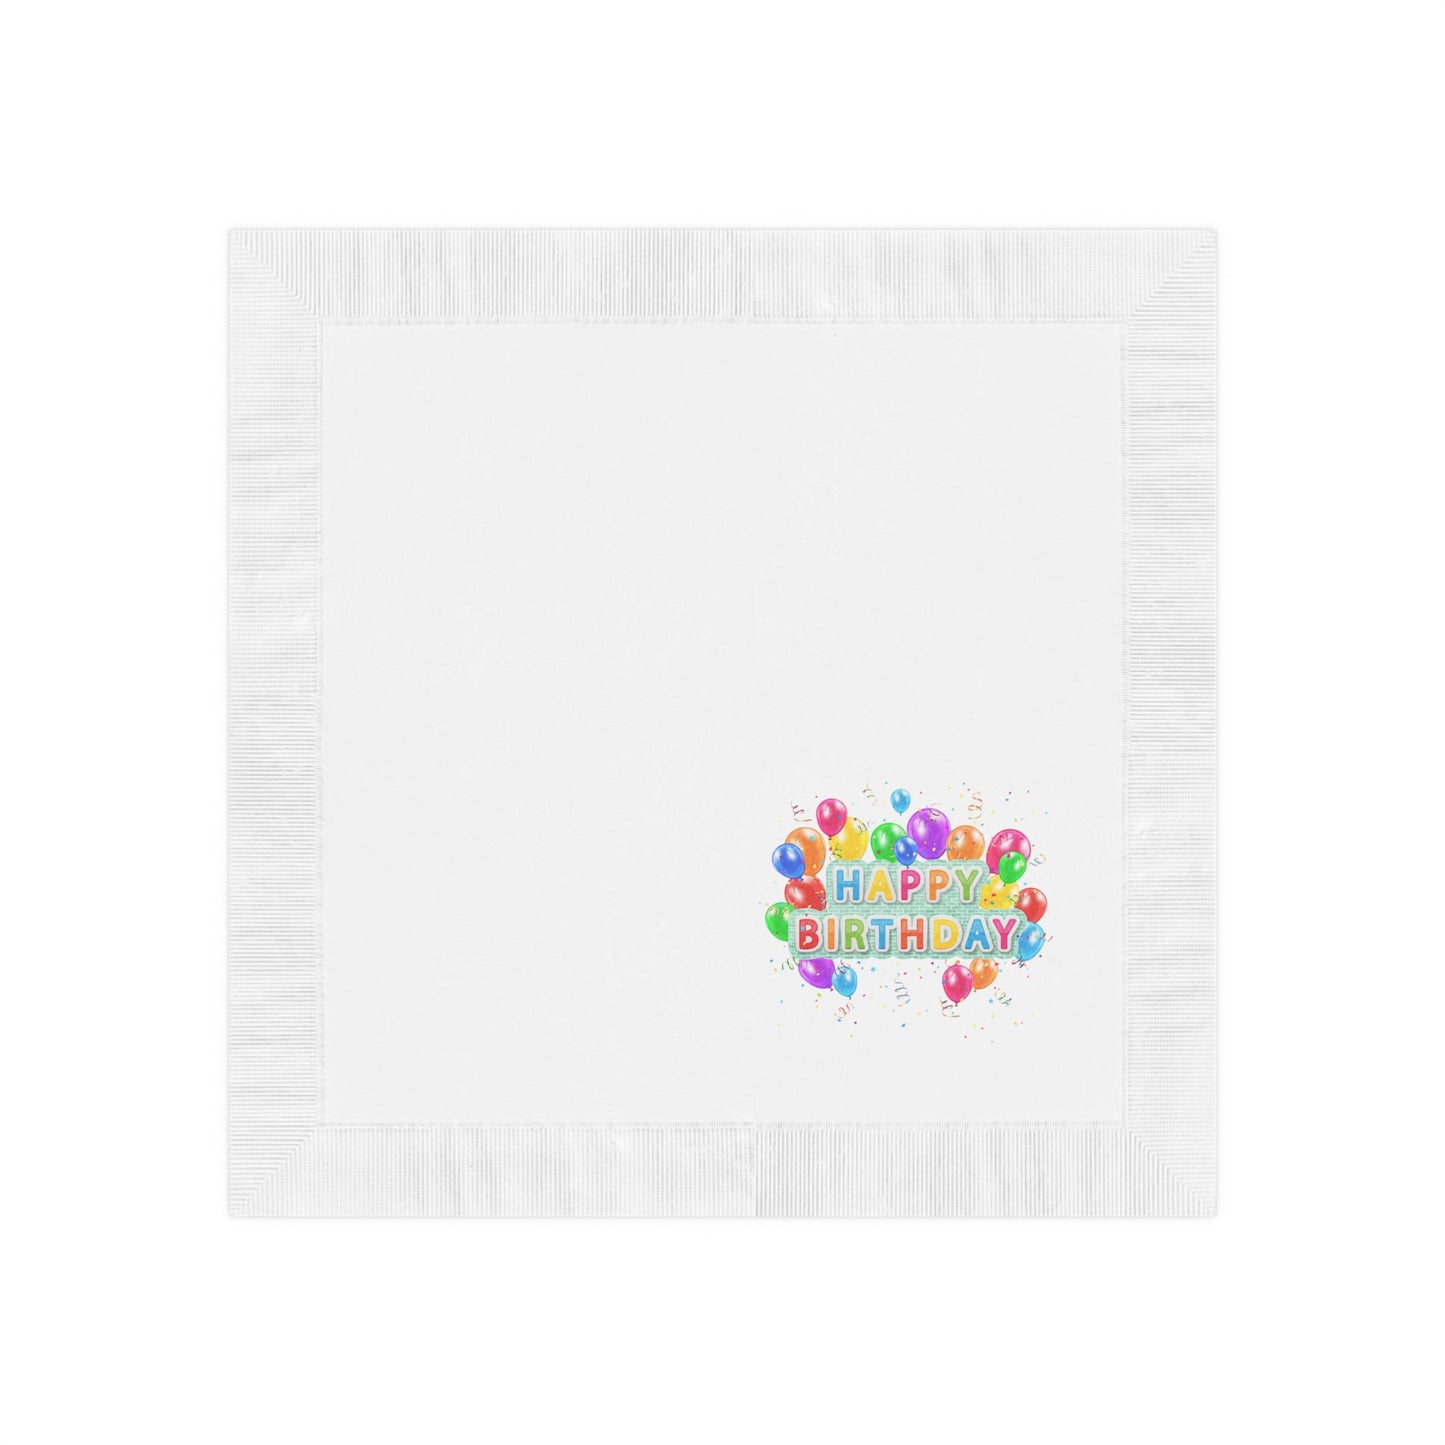 "Happy Birthday" White Coined Napkins, Available in 2 sizes (Luncheon 6.5" x 6.5") and Beverage (4.8" x 4.8")